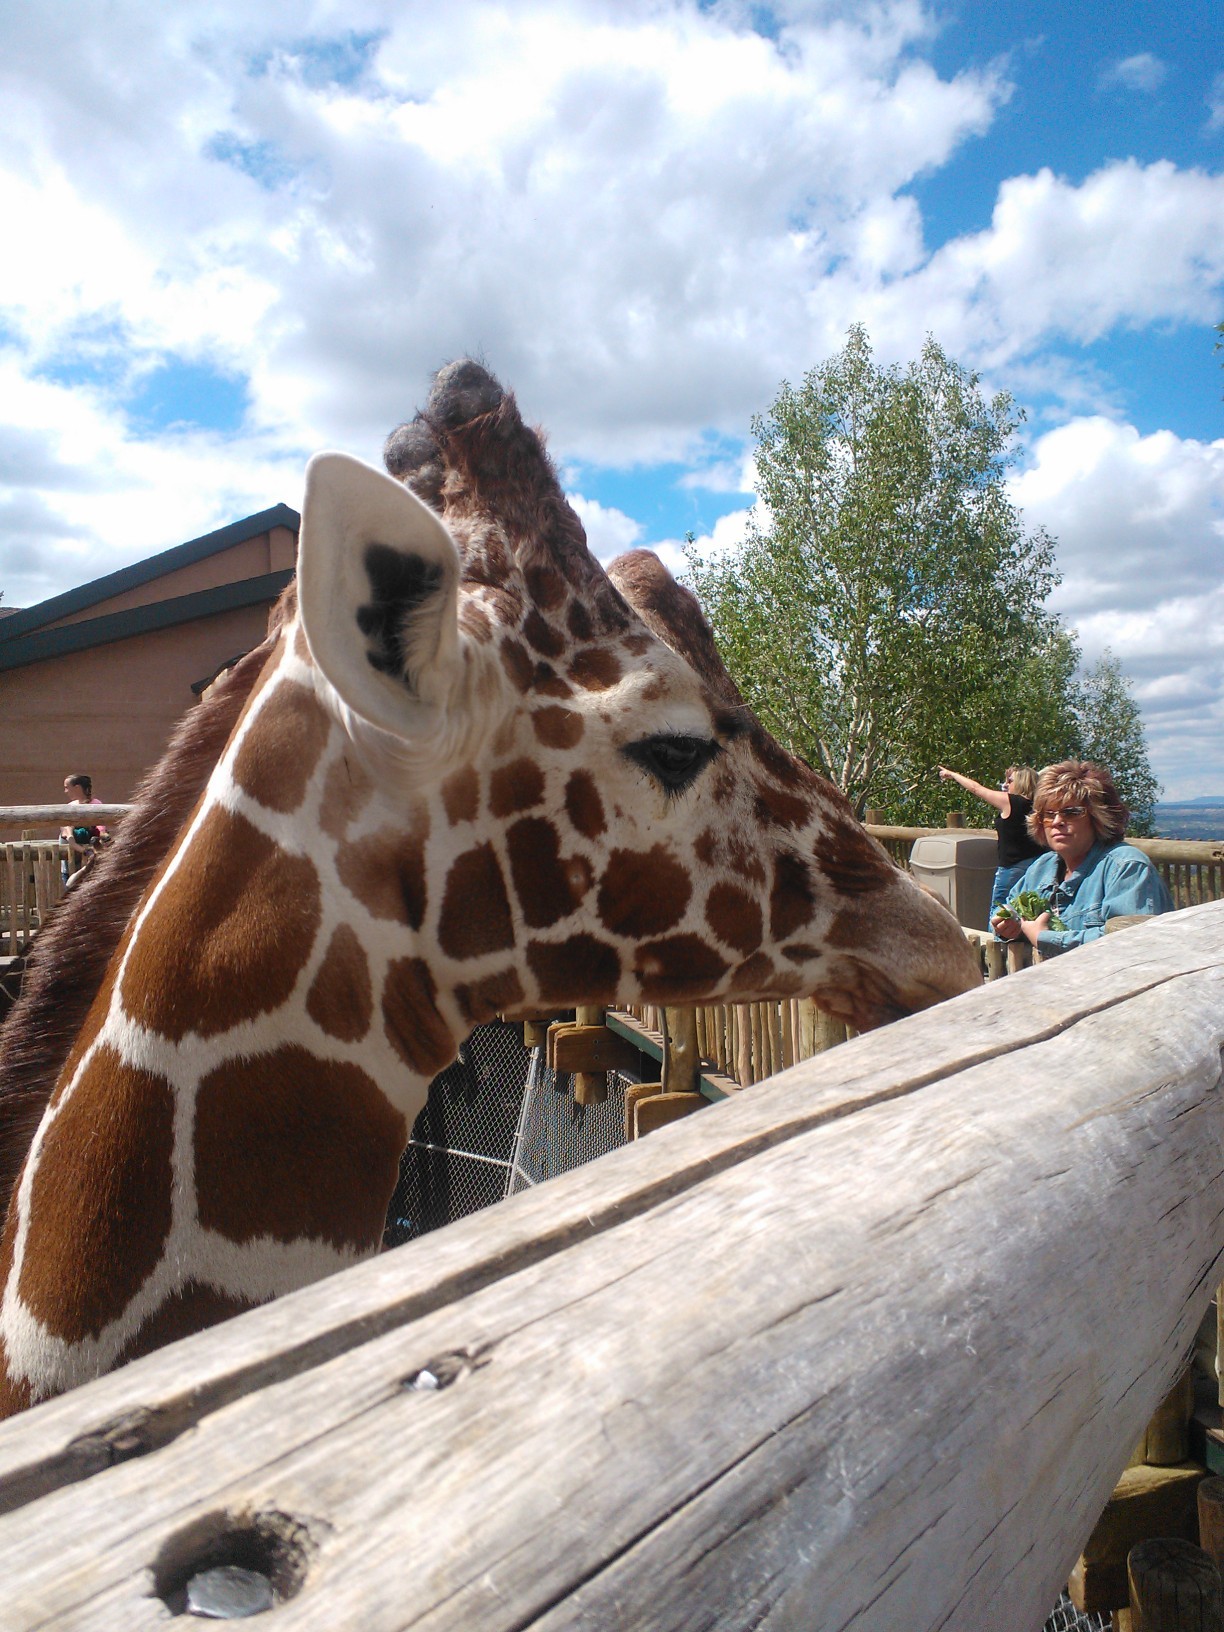 Went to the zoo today!  I got to feed giraffes today and it was the best thing ever.